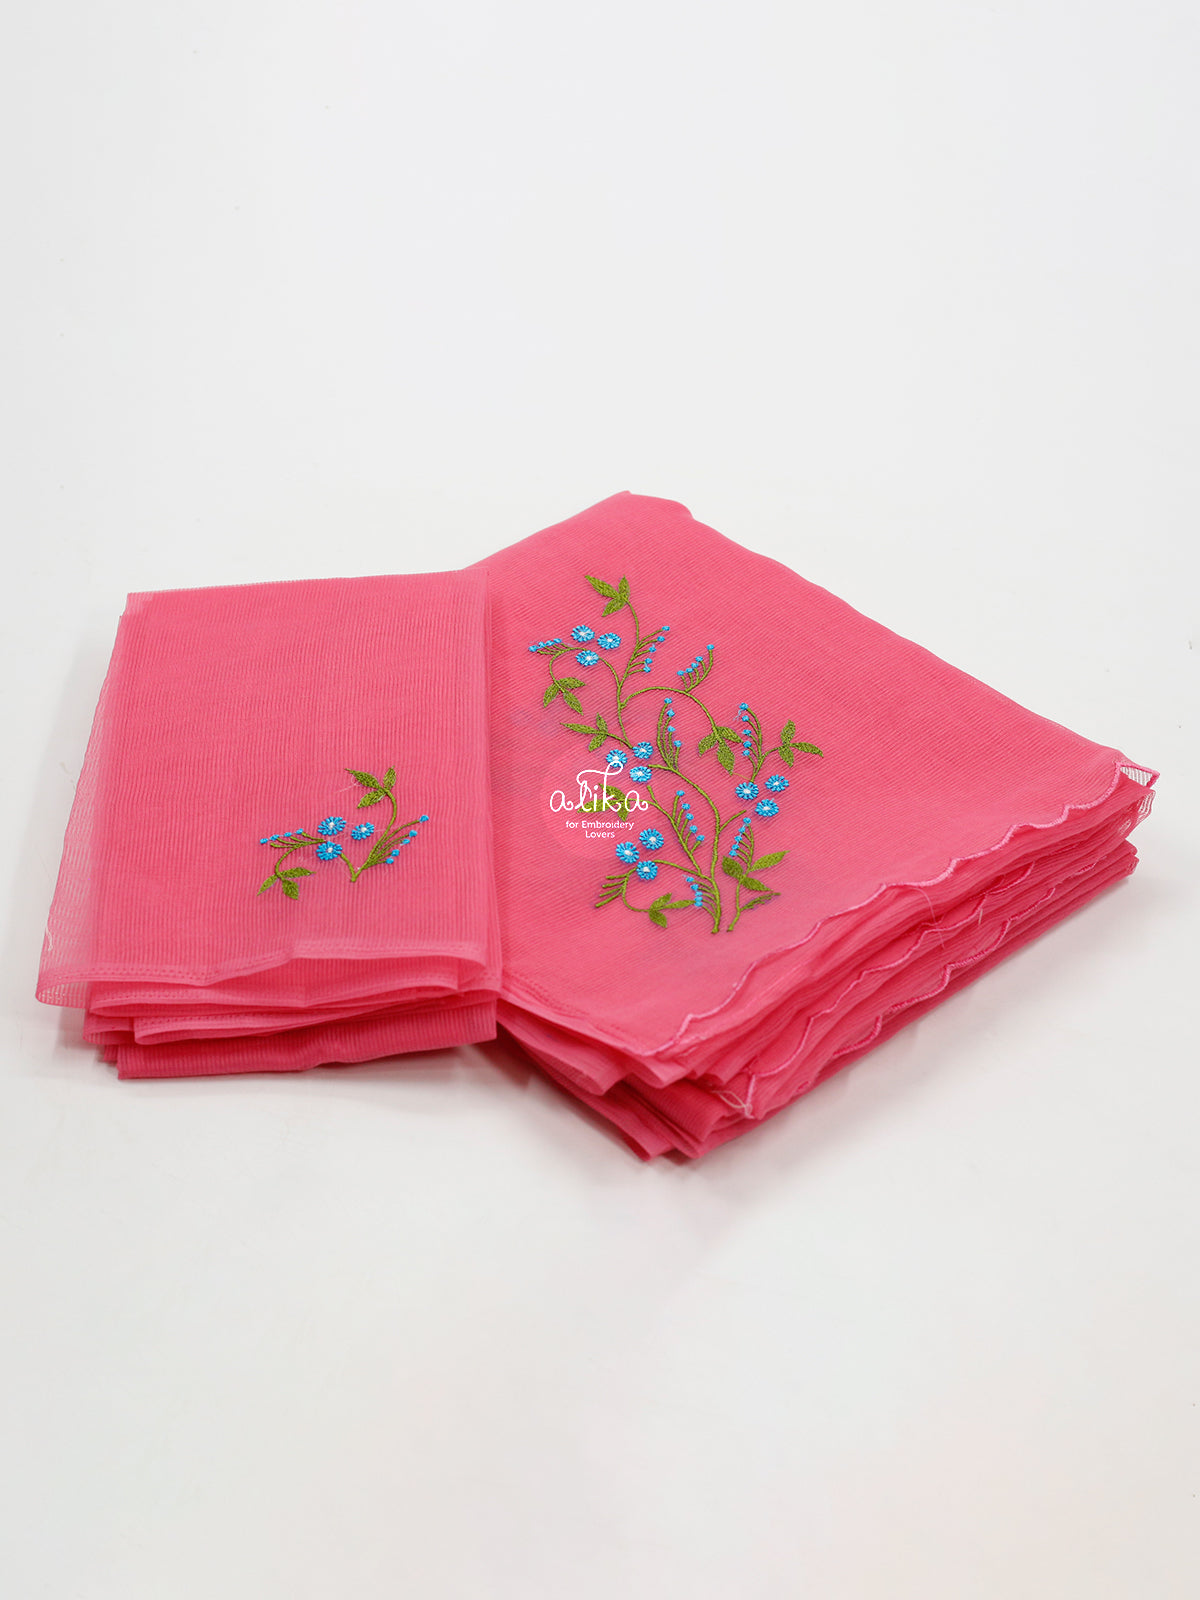 Pink Kota Saree With  blue Floral Embroidery